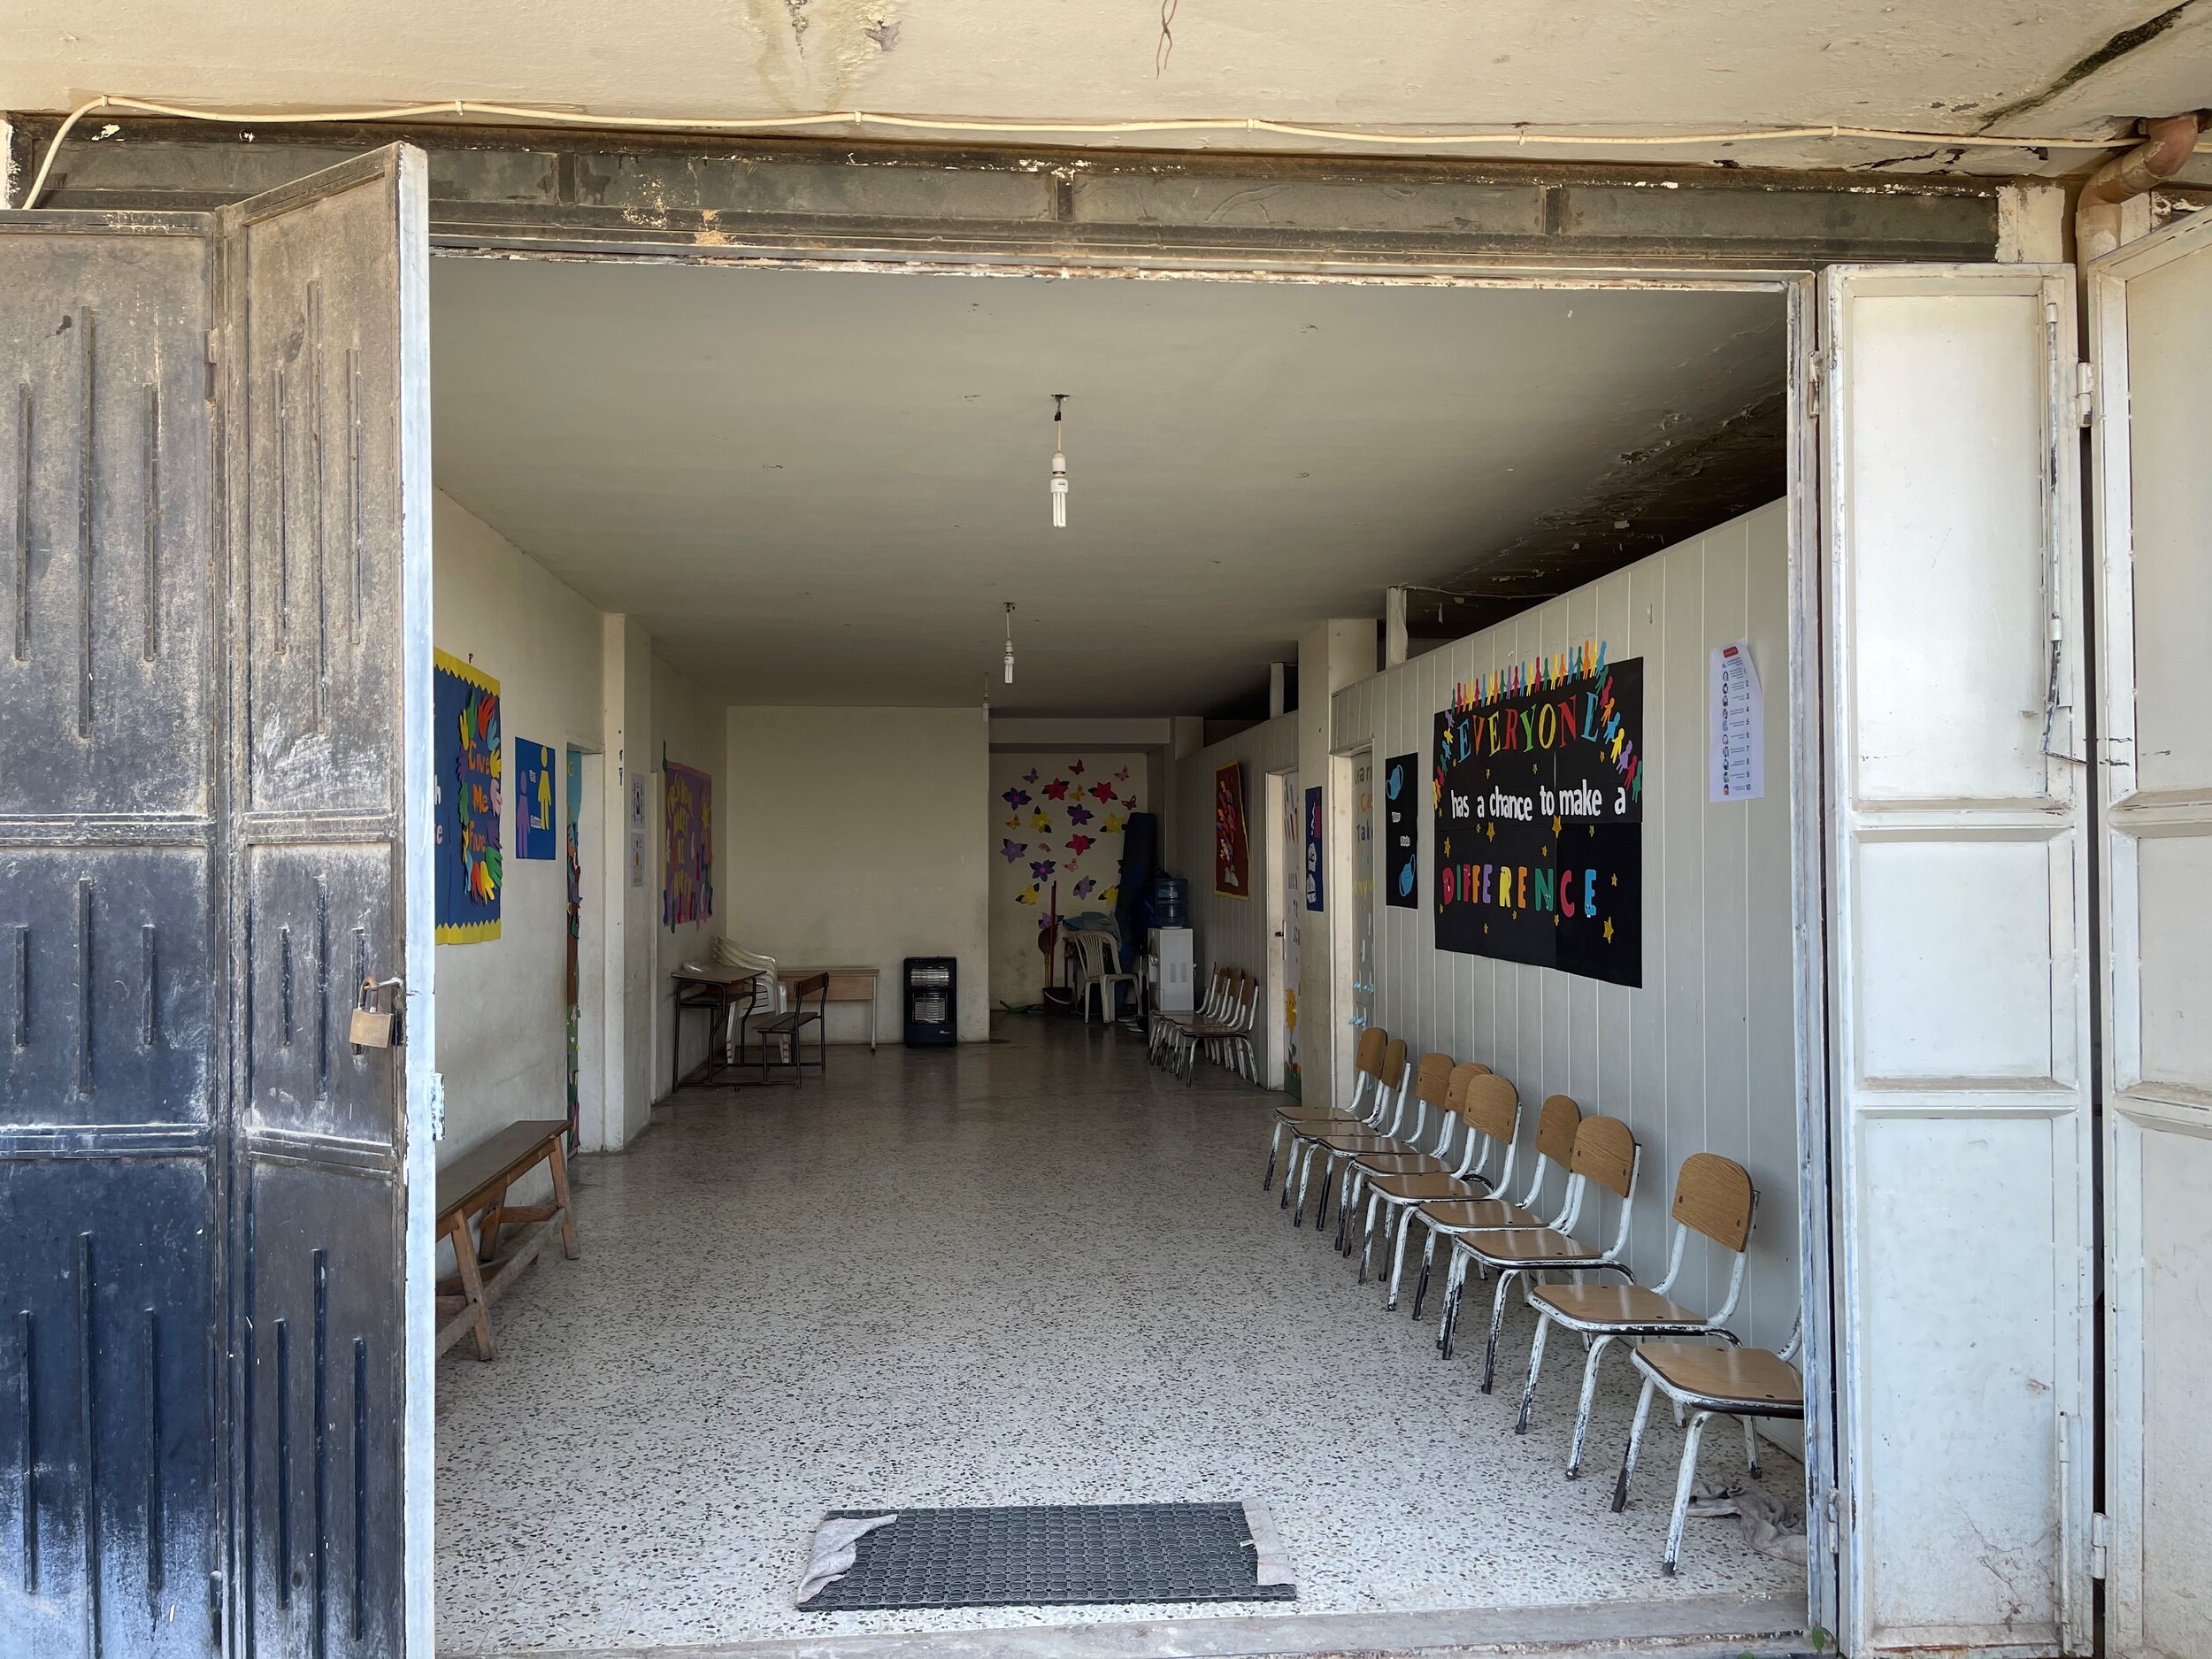  One of three side by side garages transformed into a center of Light and Hope for 60 refugee children. 